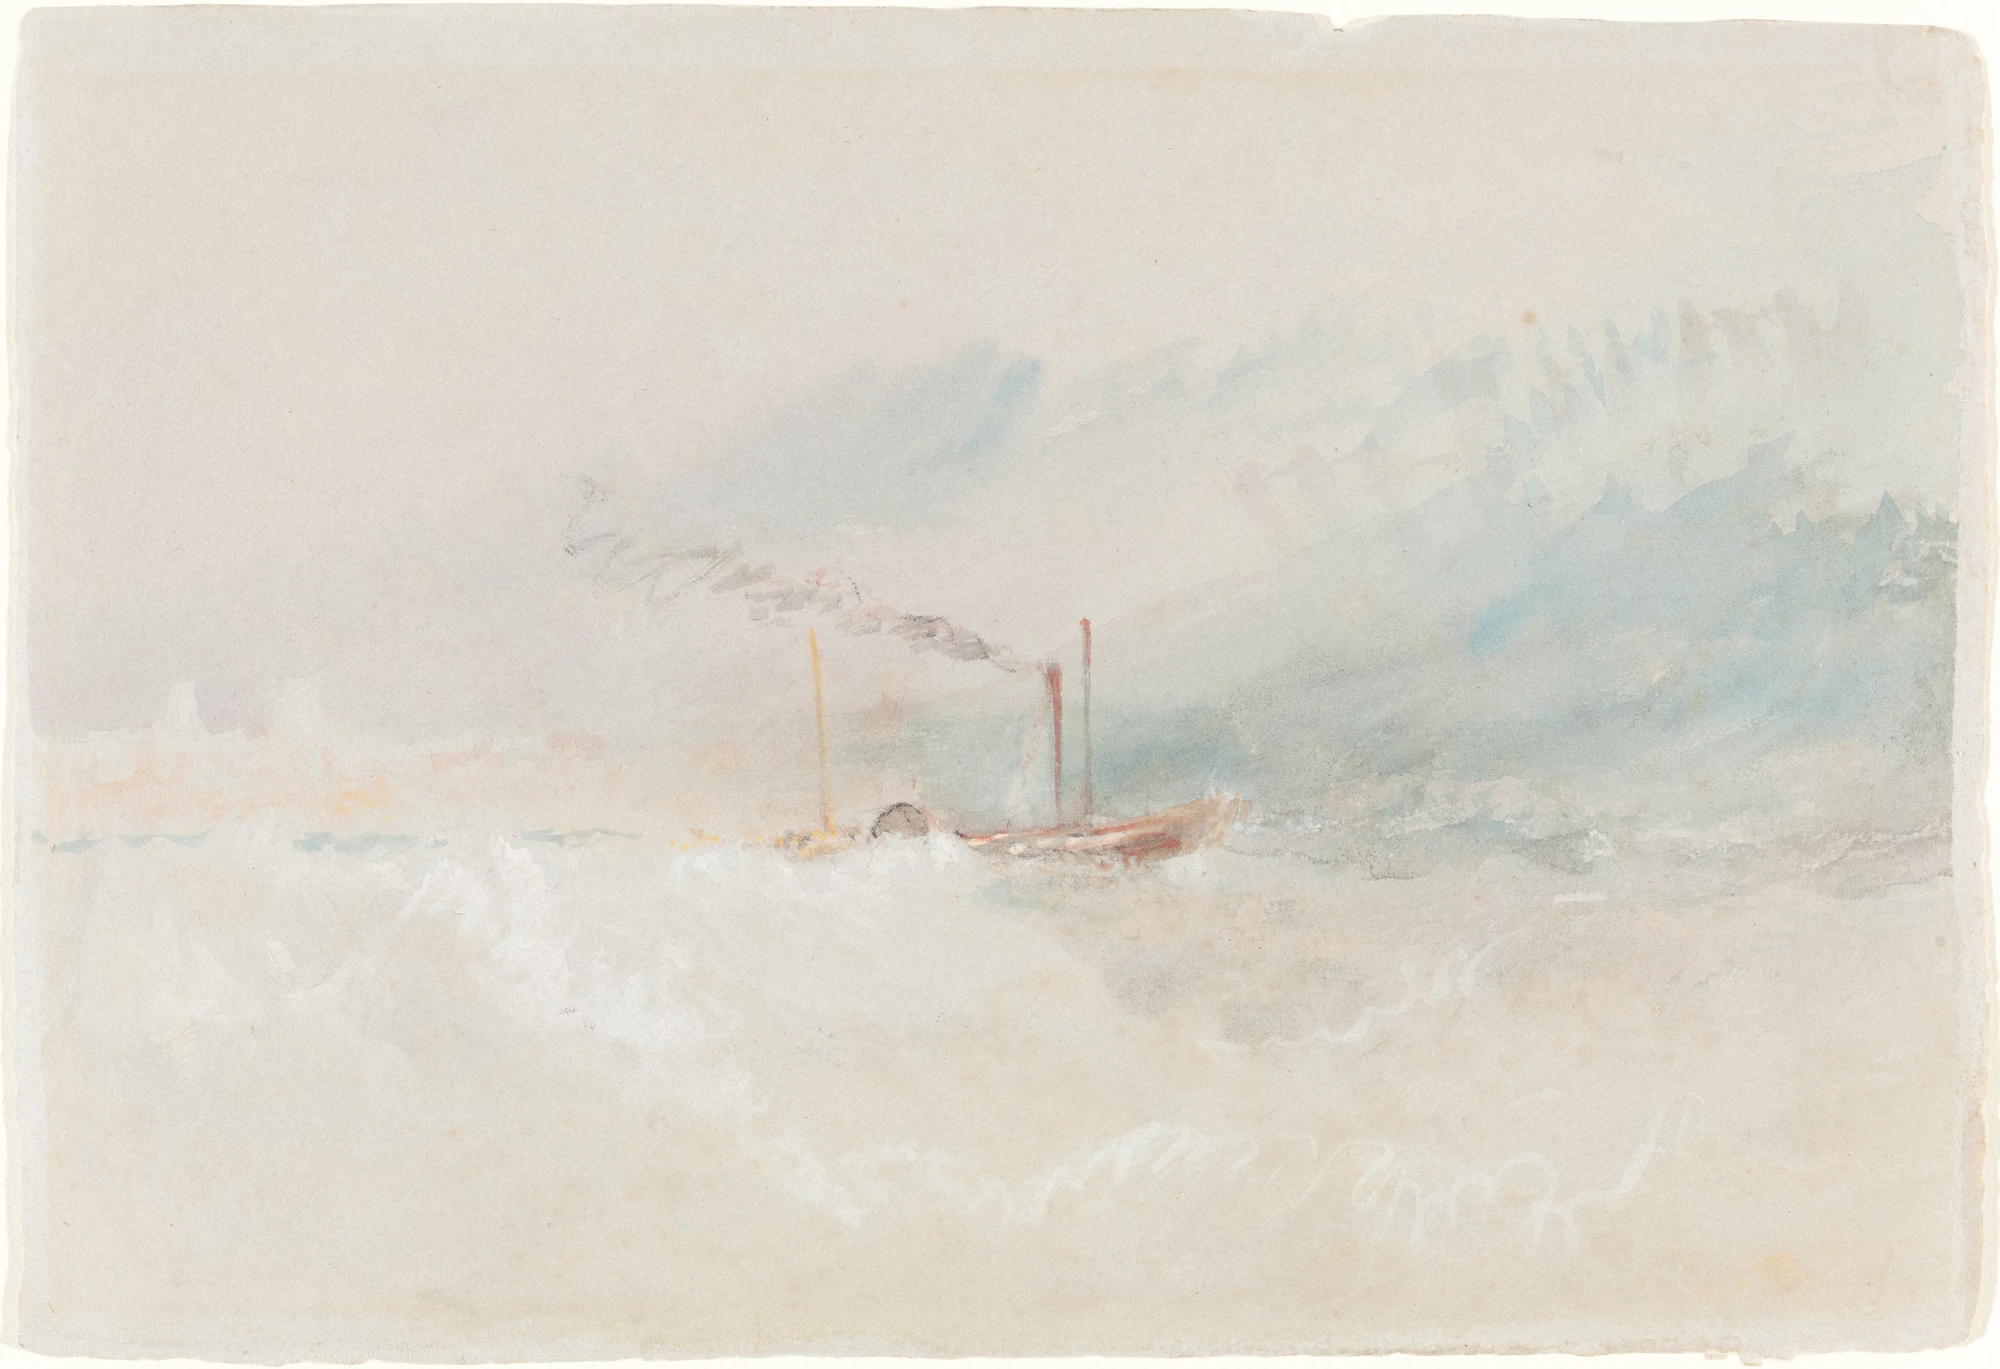 A Packet Boat off Dover, Joseph Mallord William Turner